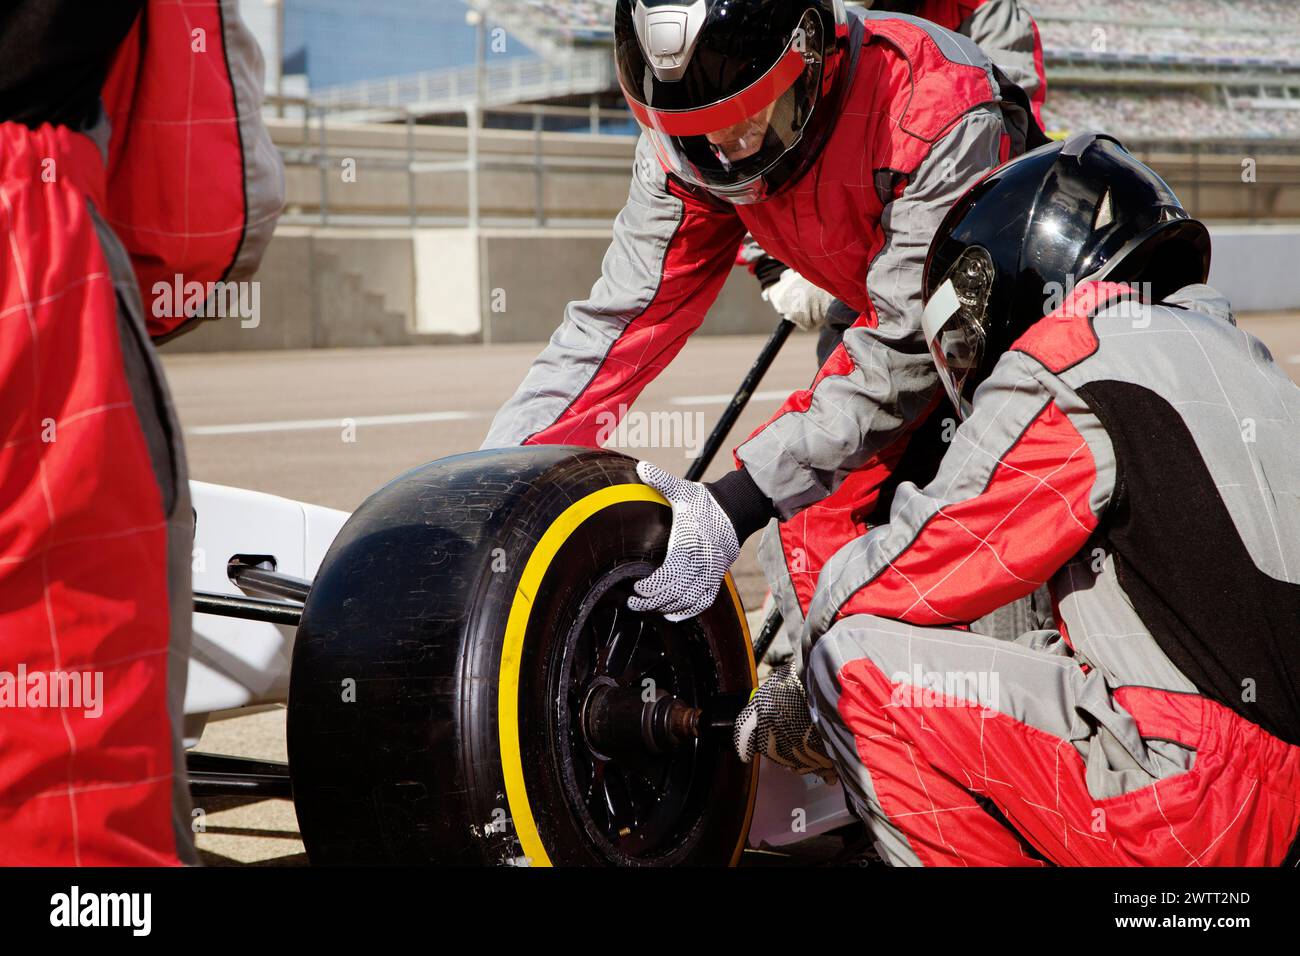 Pit crew members in red and white uniforms working on changing a tire of a white racing car on a racetrack. Stock Photo